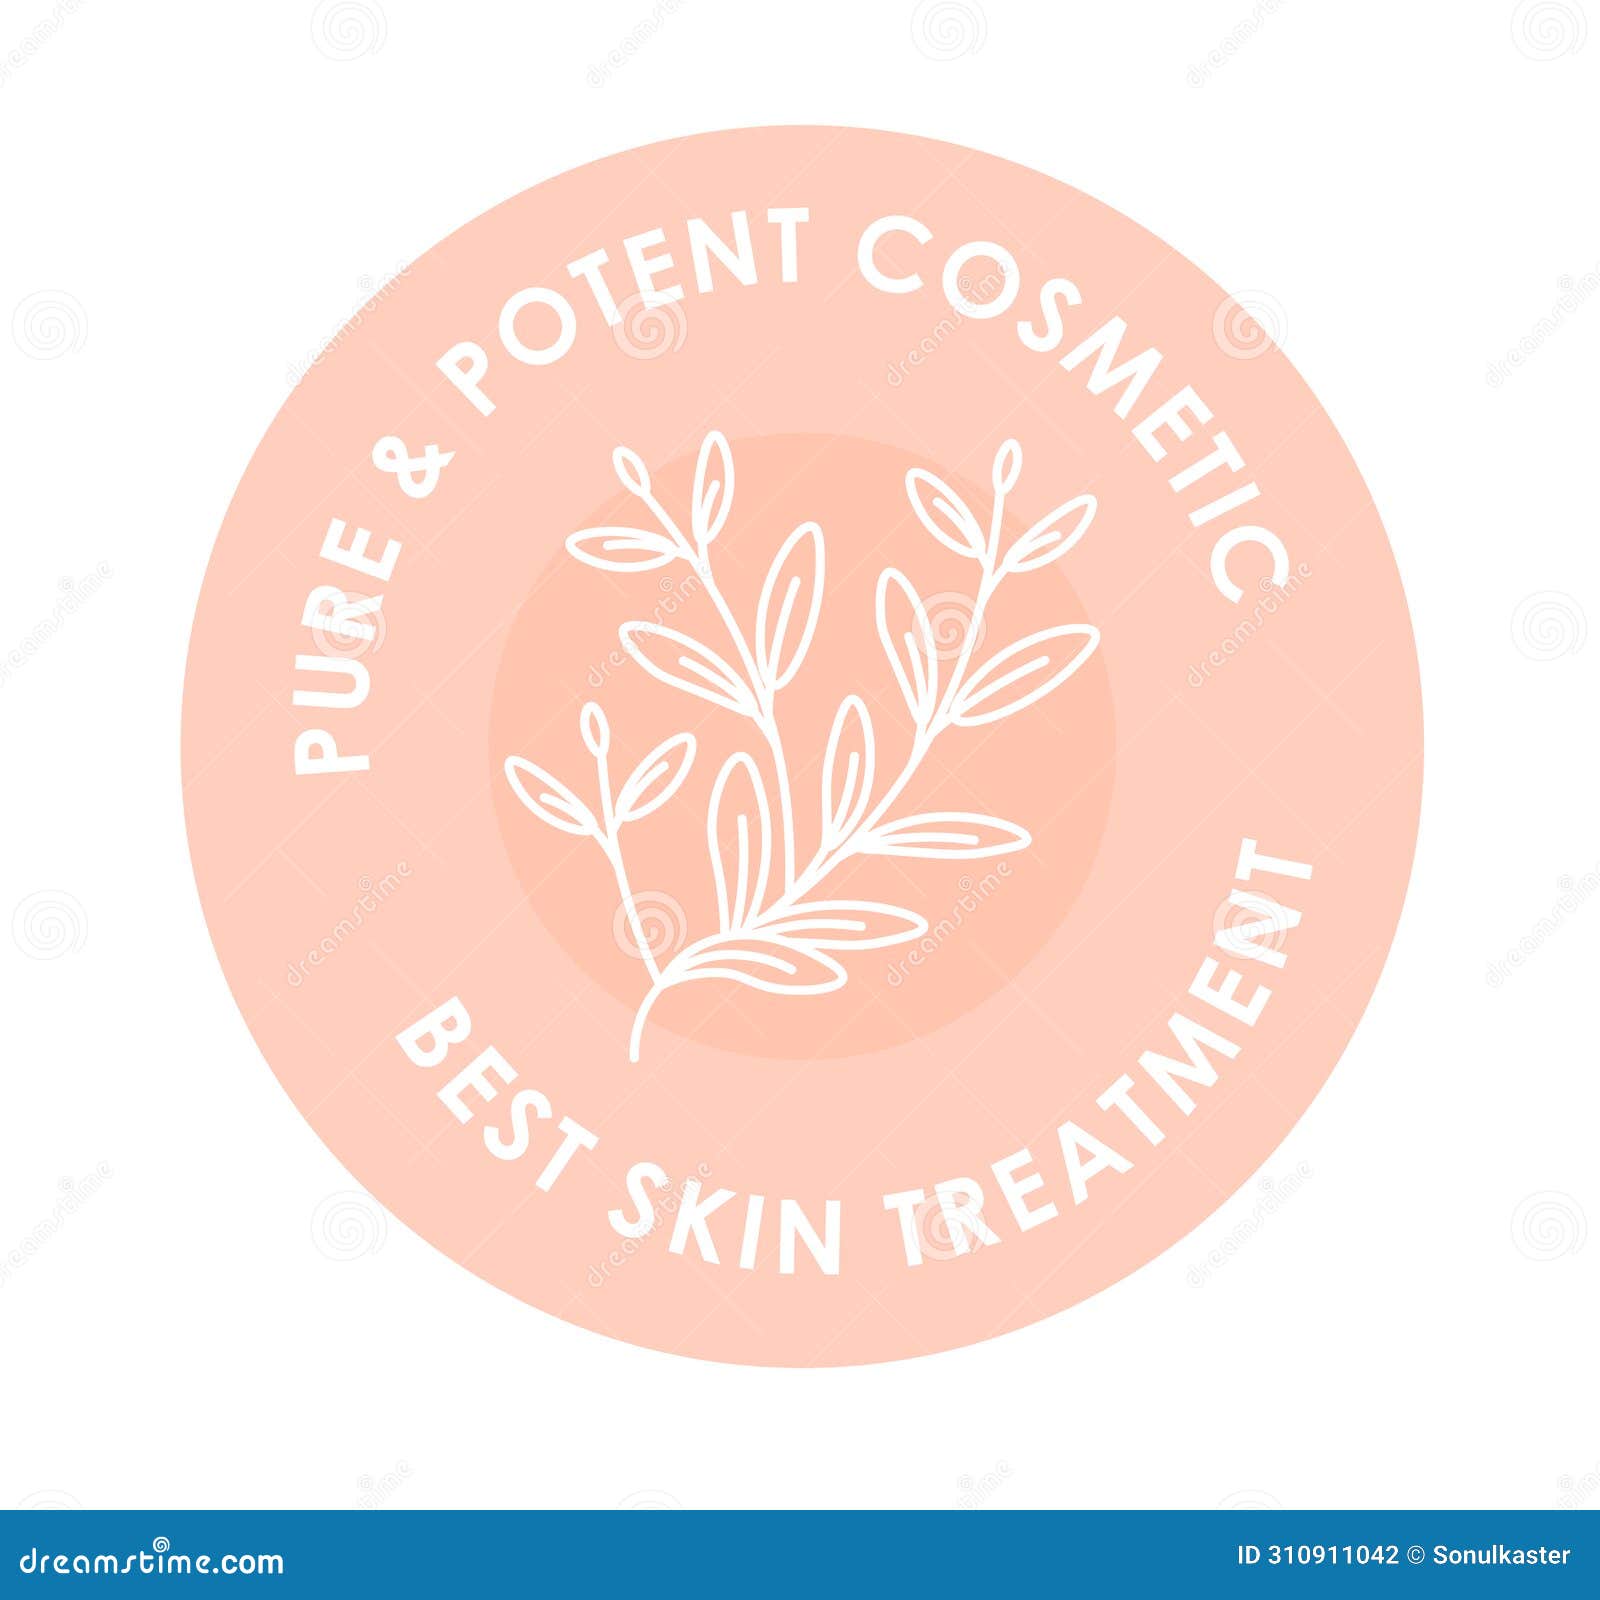 pure and potent cosmetic, best skin treatment logo